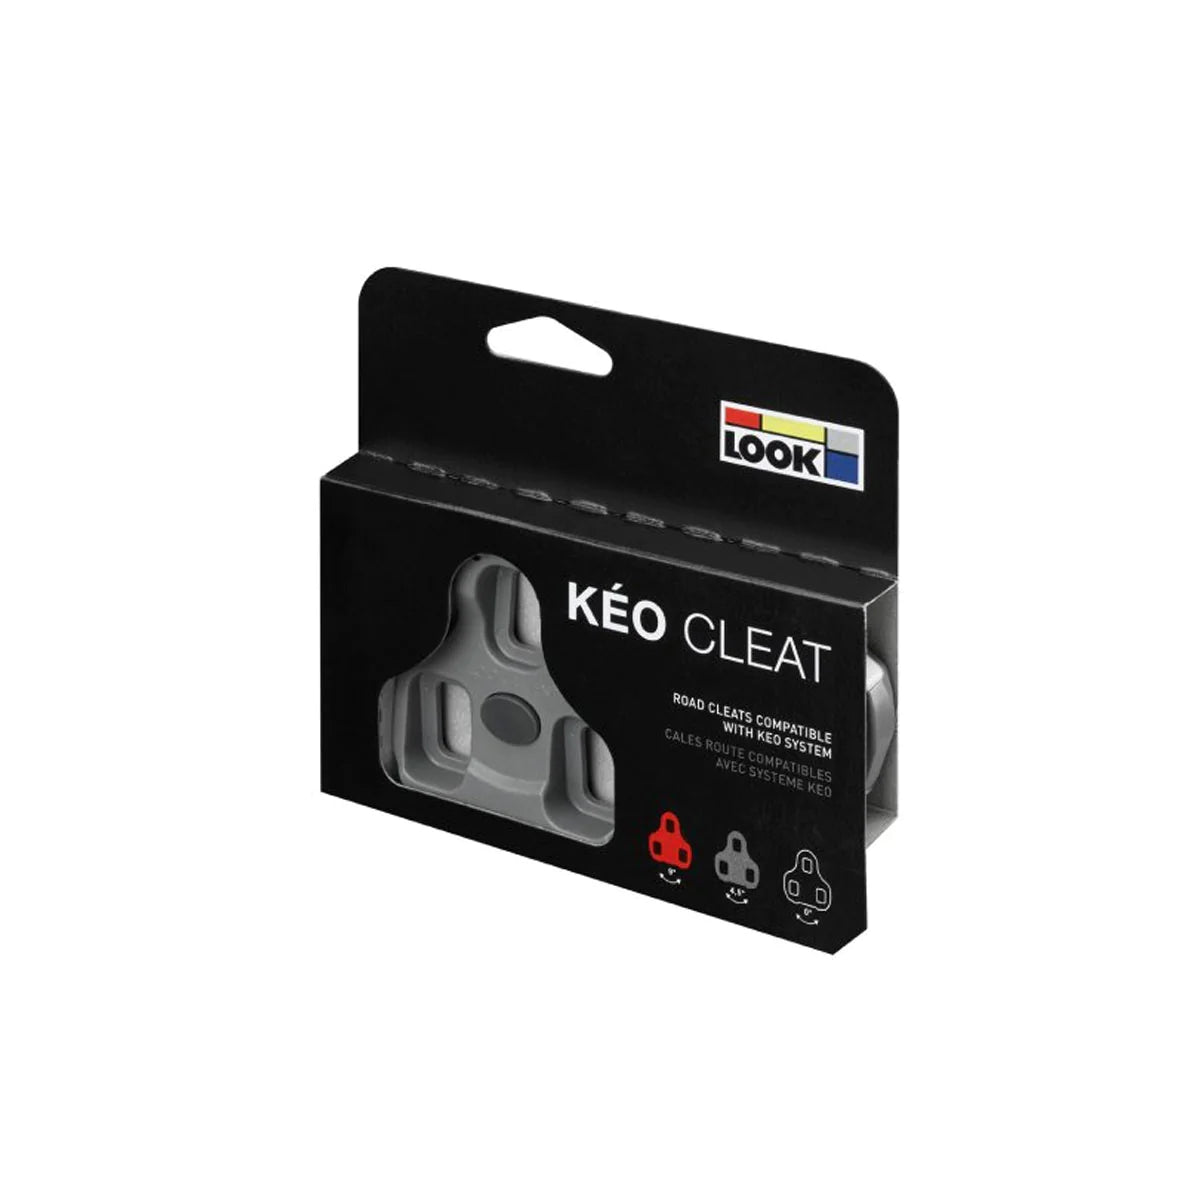 Keo Cleat Road